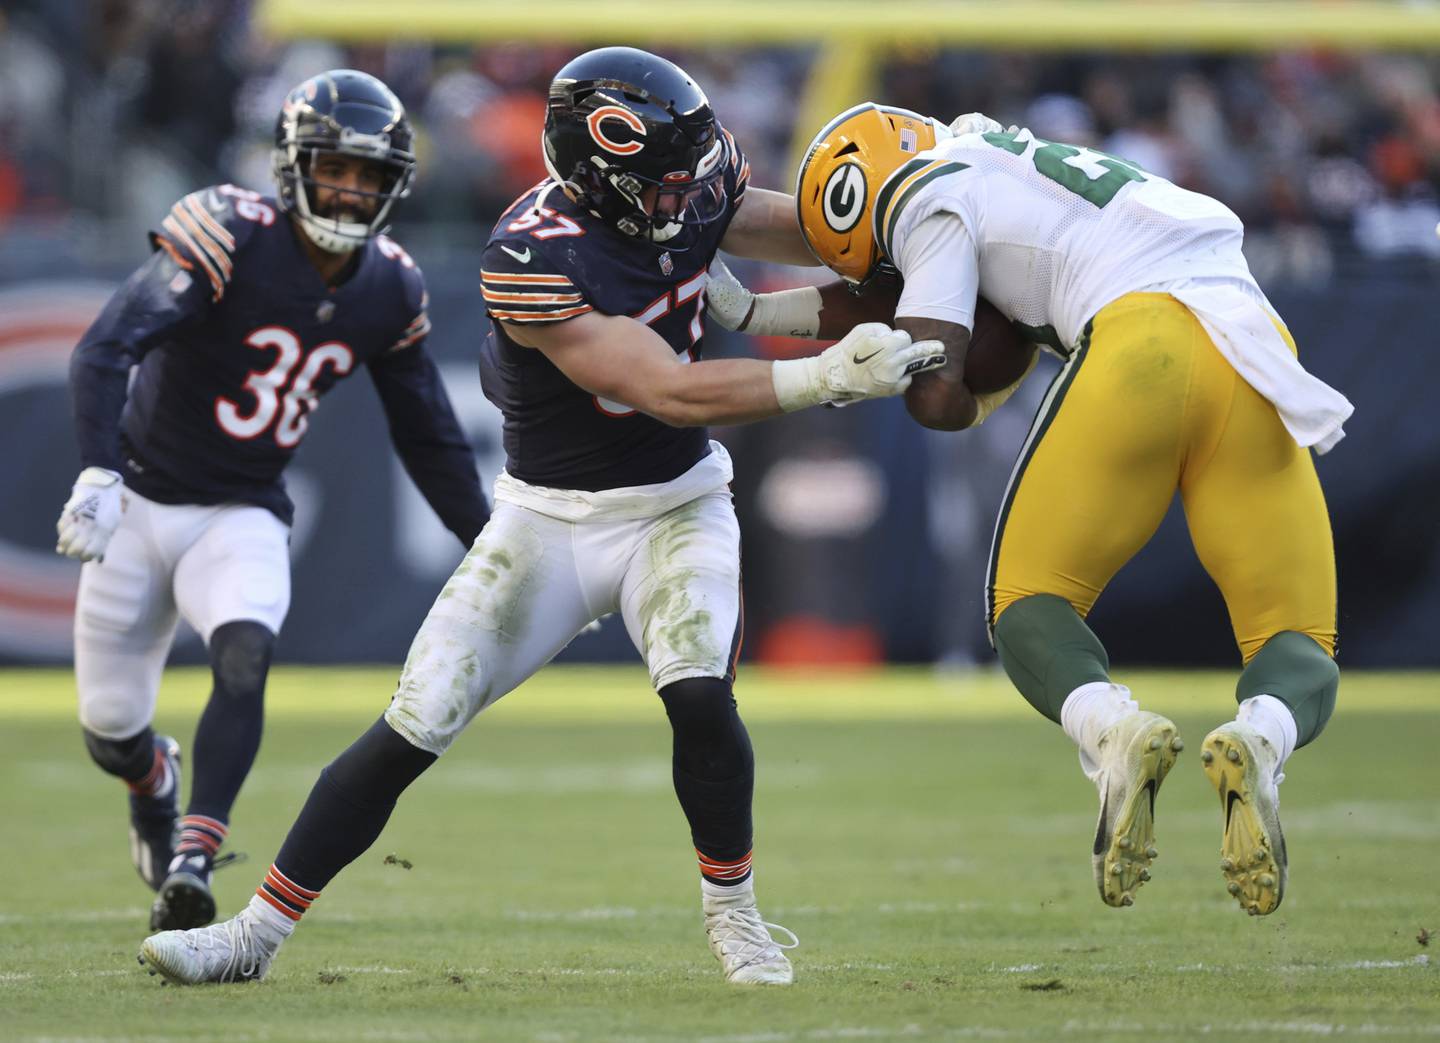 Bears linebacker Jack Sanborn tackles Packers running back AJ Dillon in the fourth quarter at Soldier Field on Dec. 4, 2022.